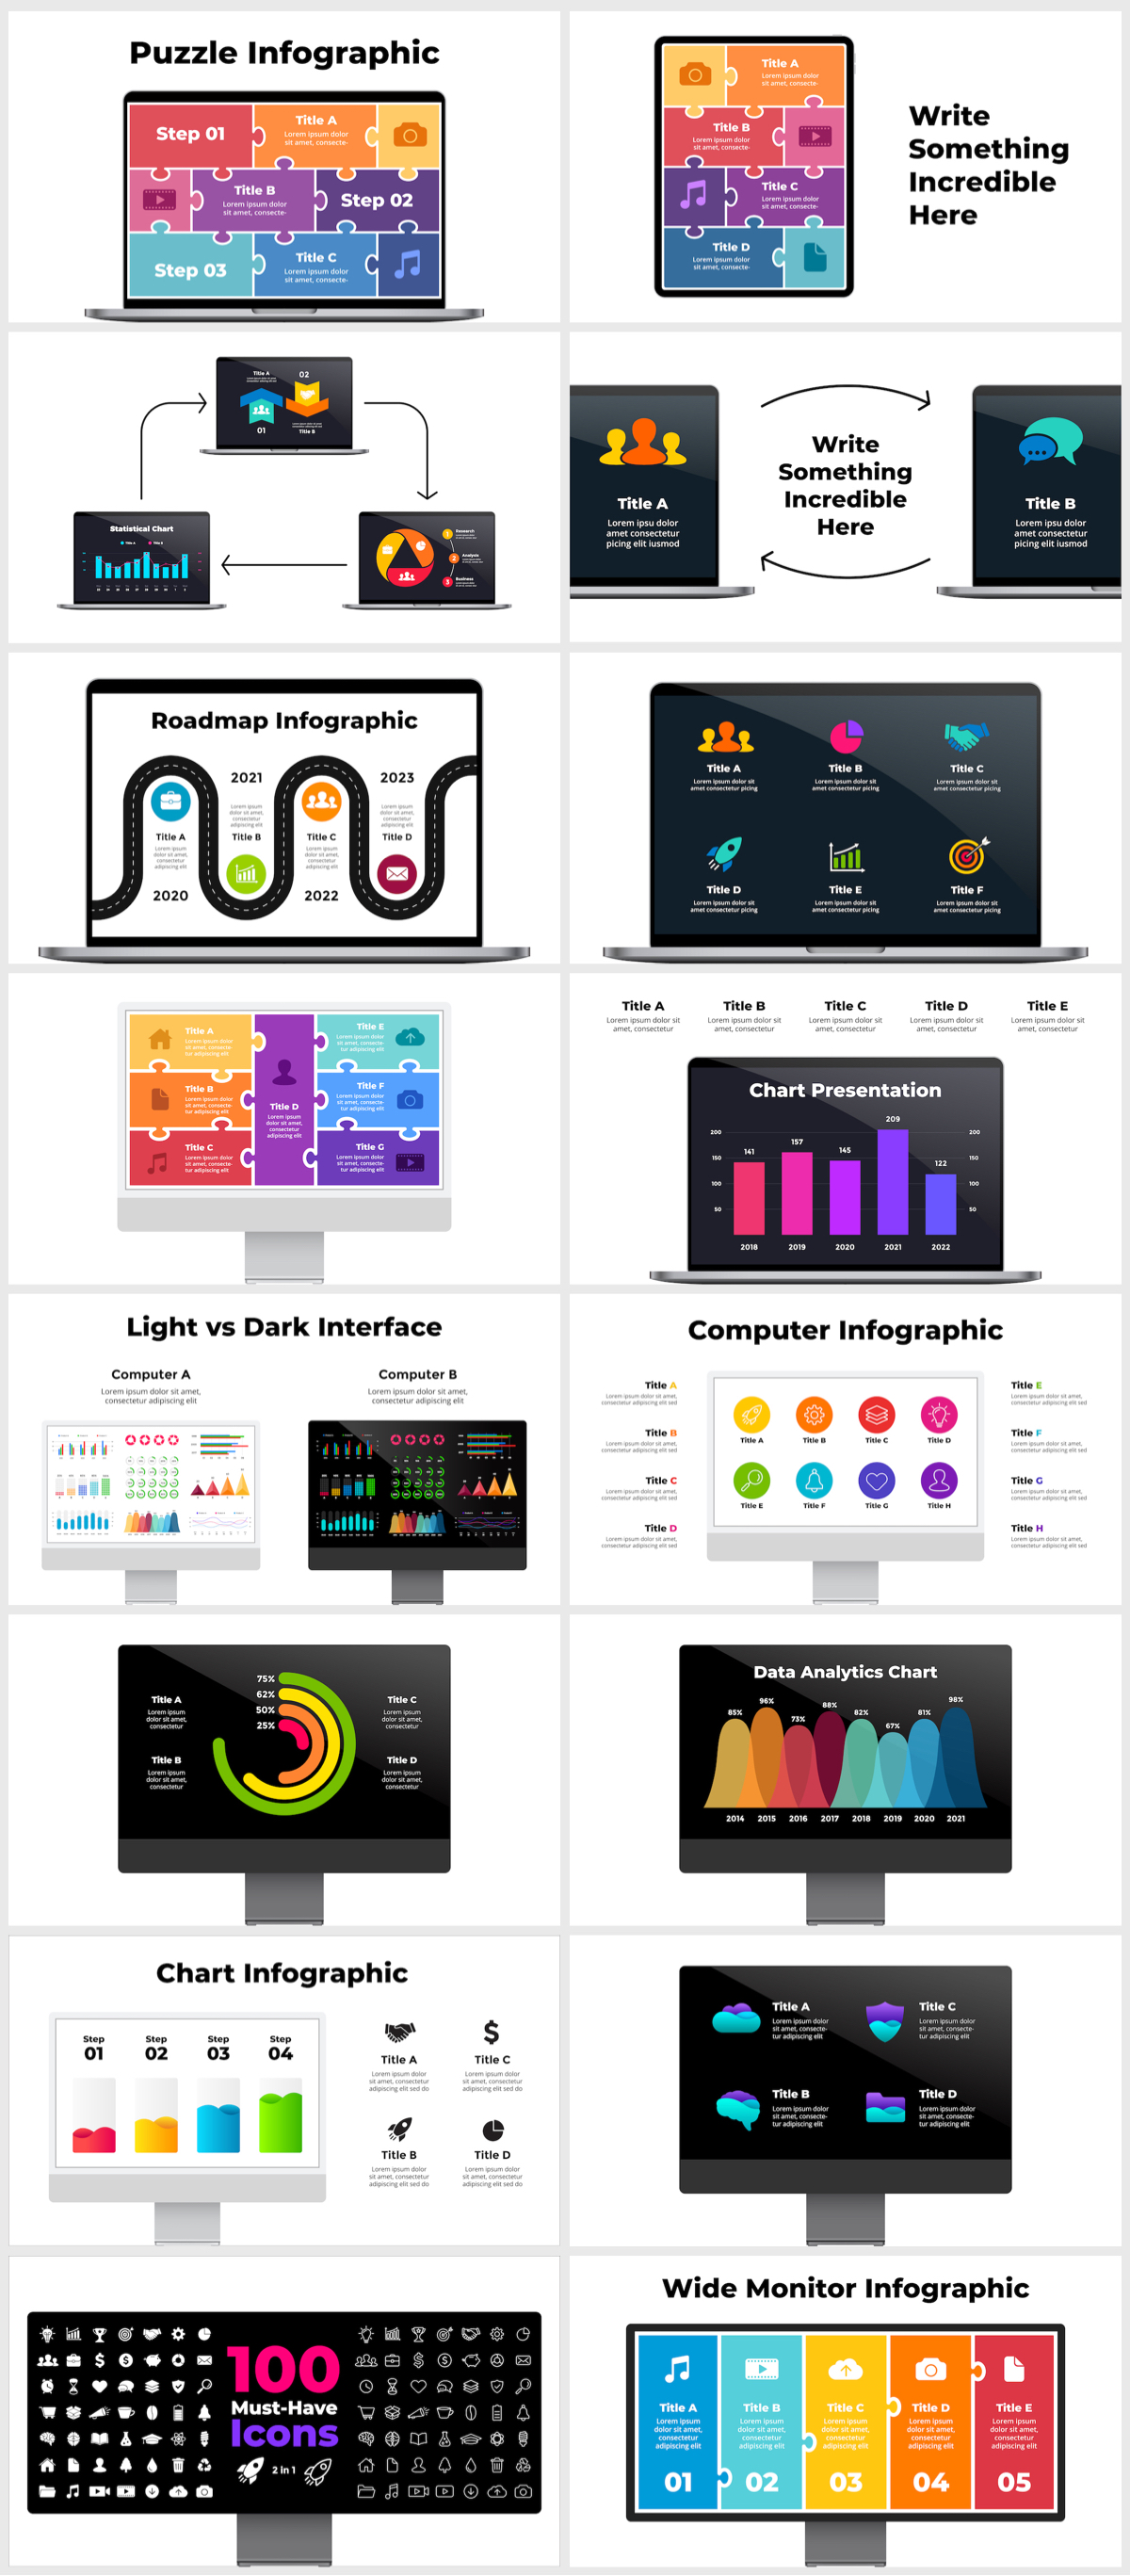 Wowly - 3500 Infographics & Presentation Templates! Updated! PowerPoint Canva Figma Sketch Ai Psd. - 220